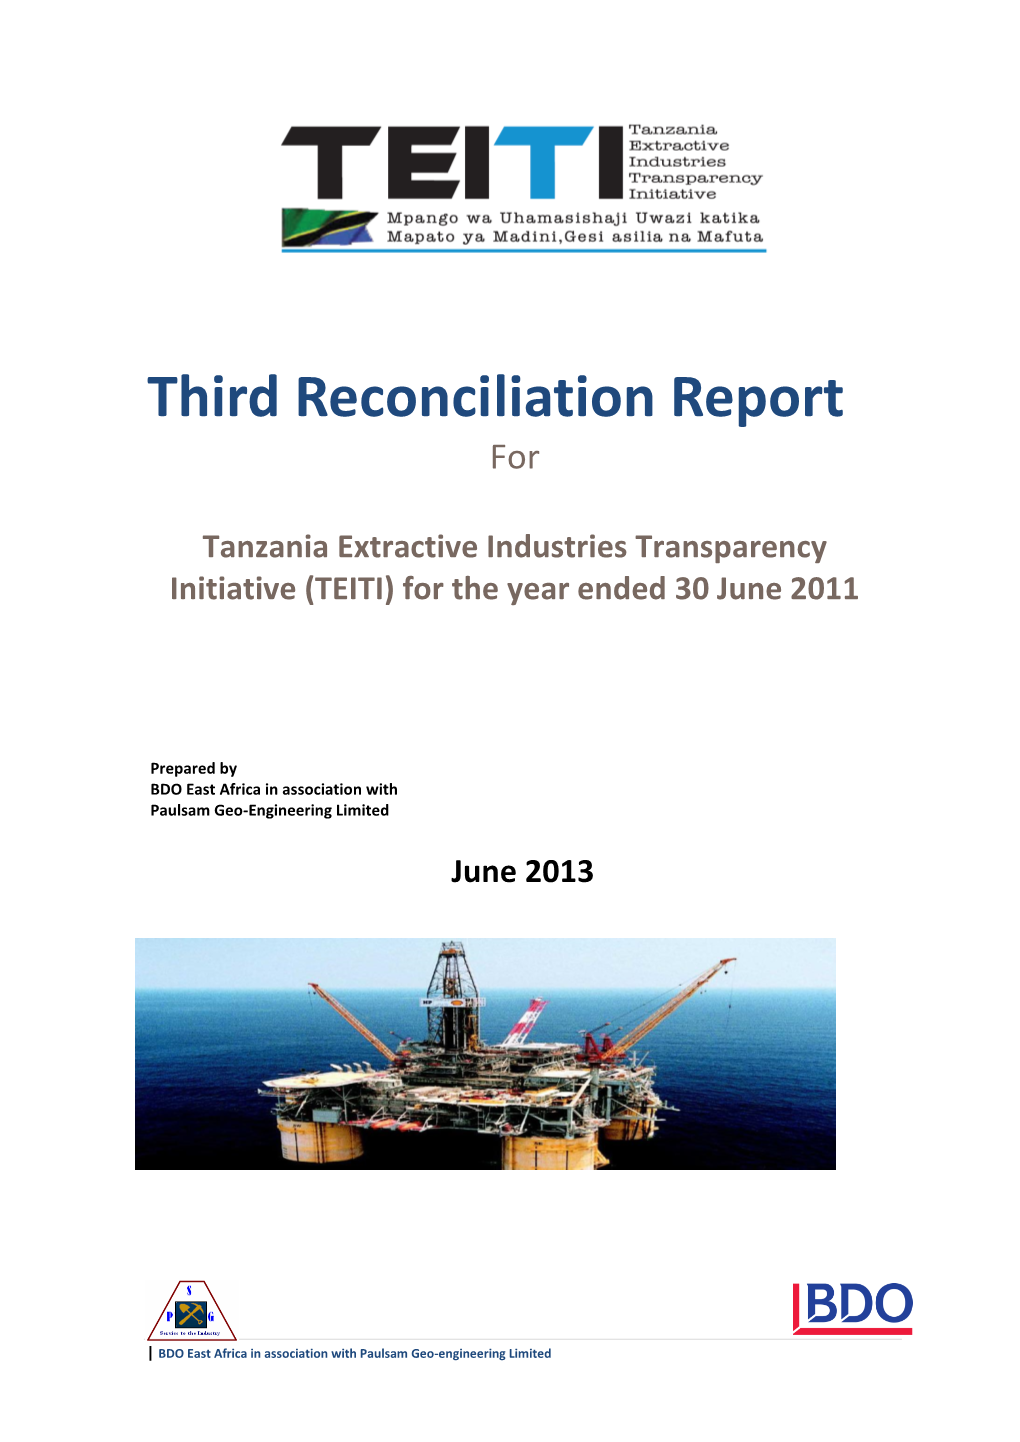 Tanzania Extractive Industries Transparency Initiative